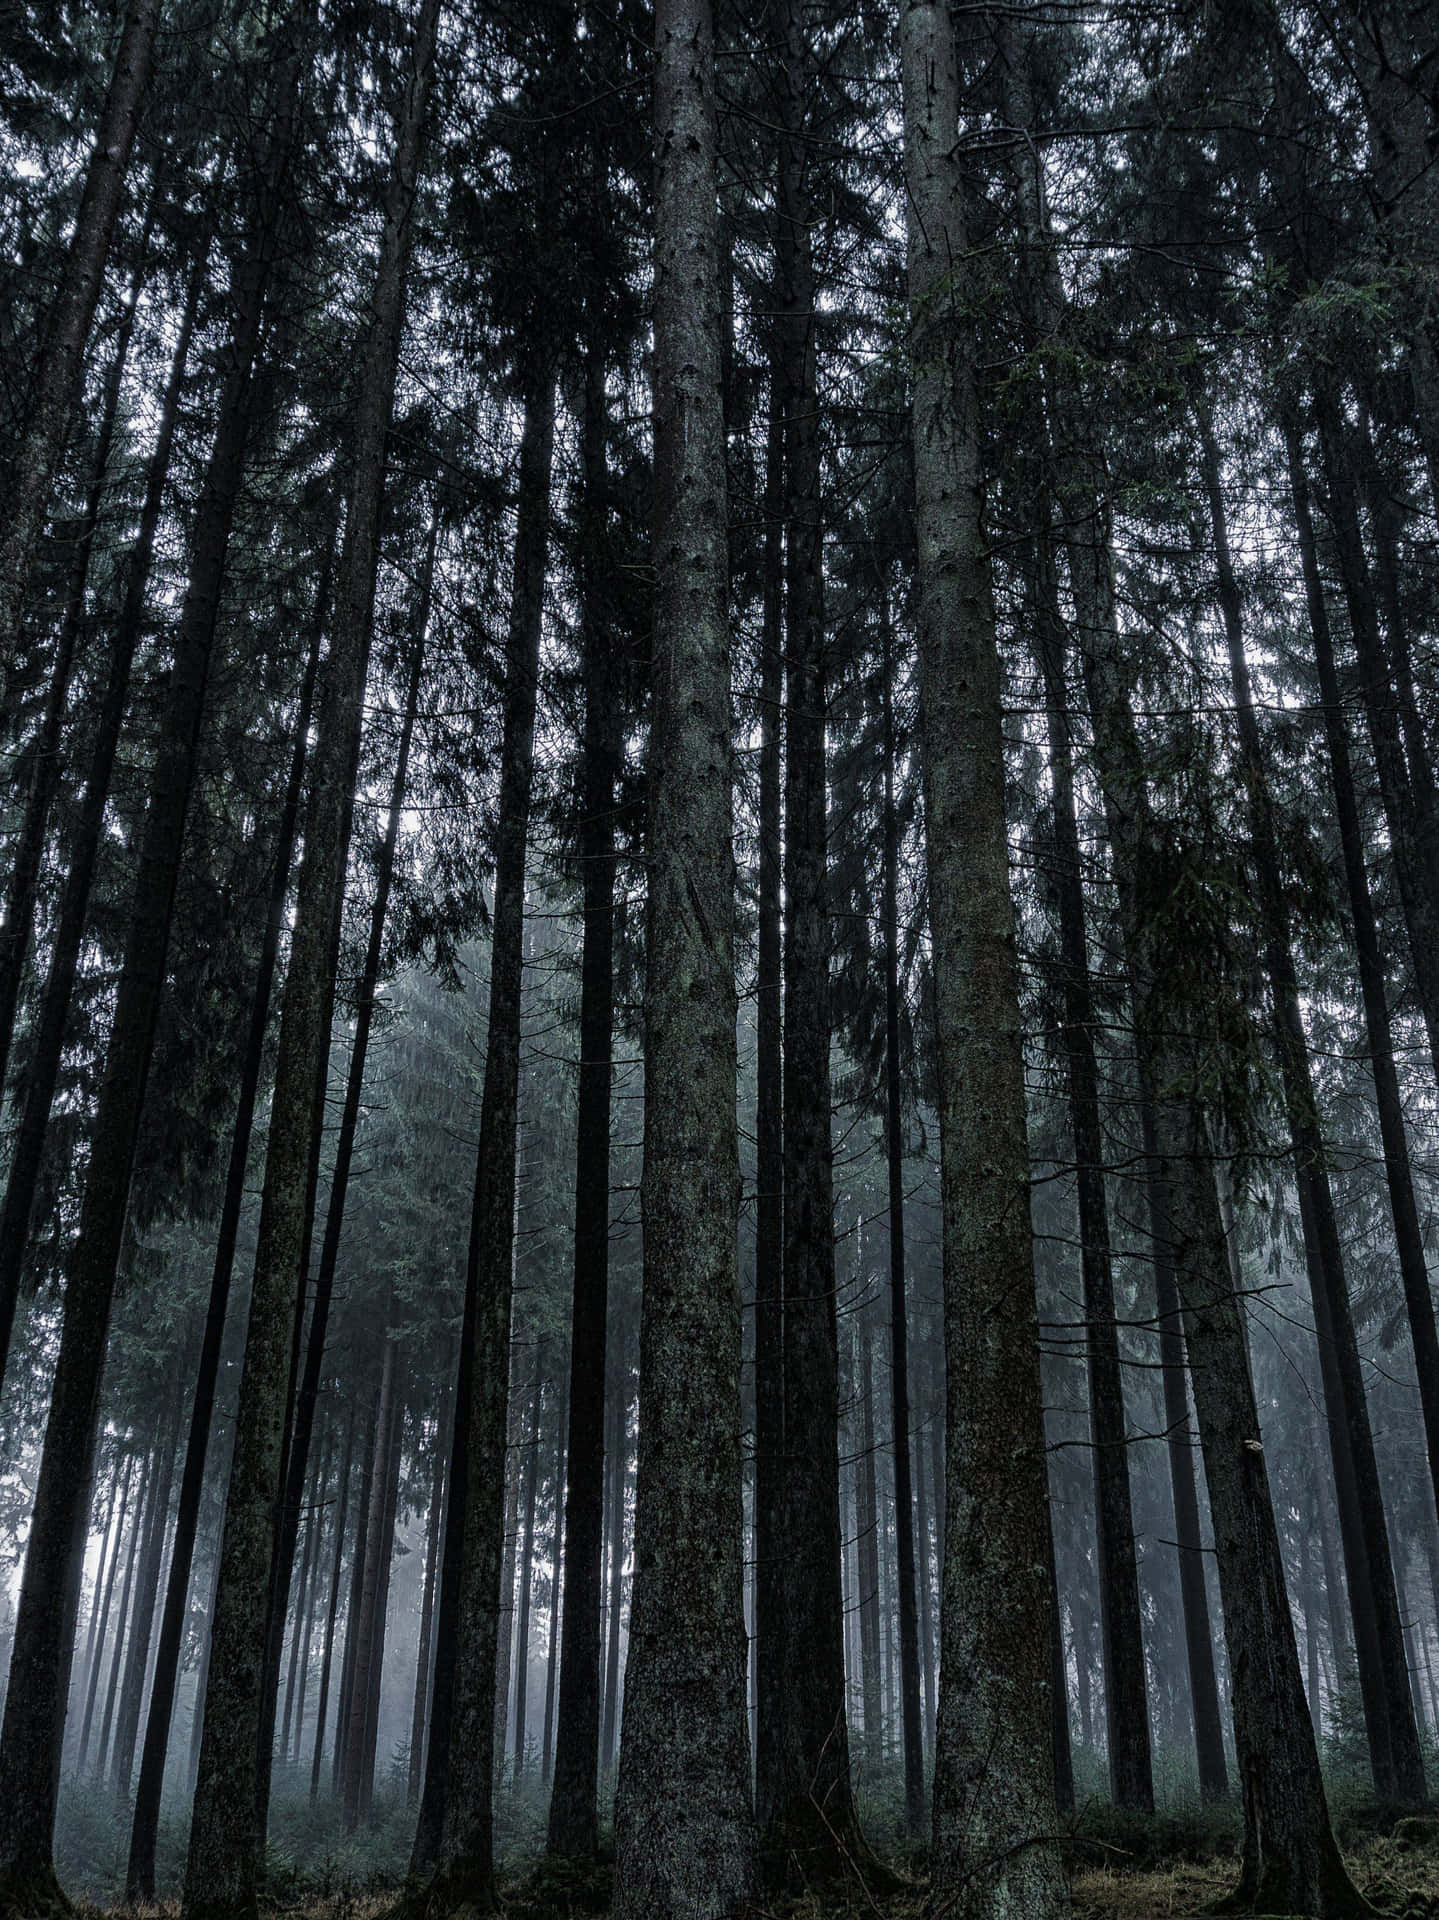 Immerse yourself in the beauty of nature with this captivating dark forest.